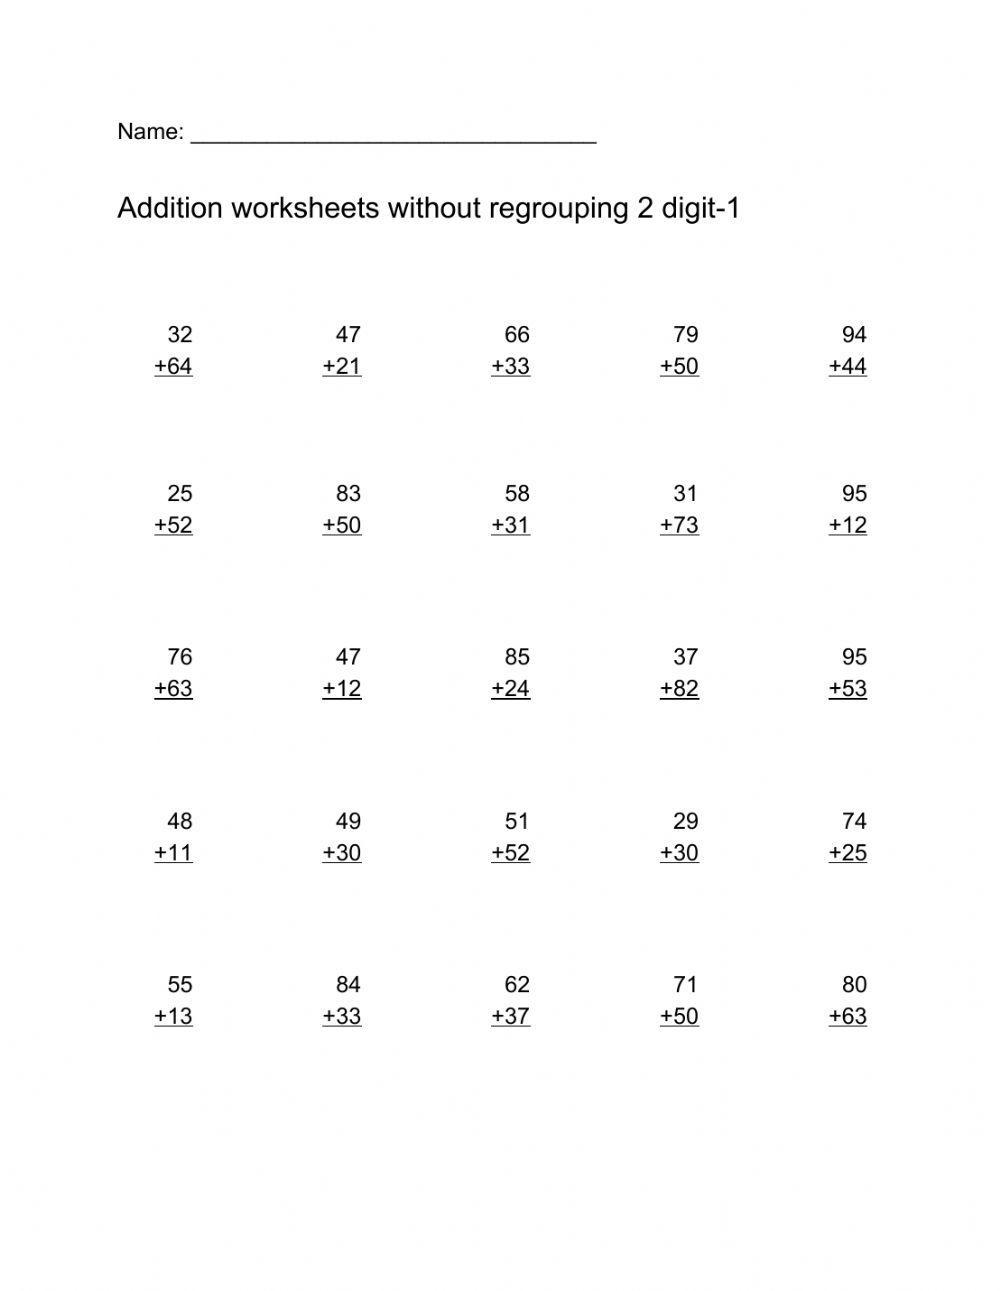 Addition worksheets without regrouping 2 digit-1